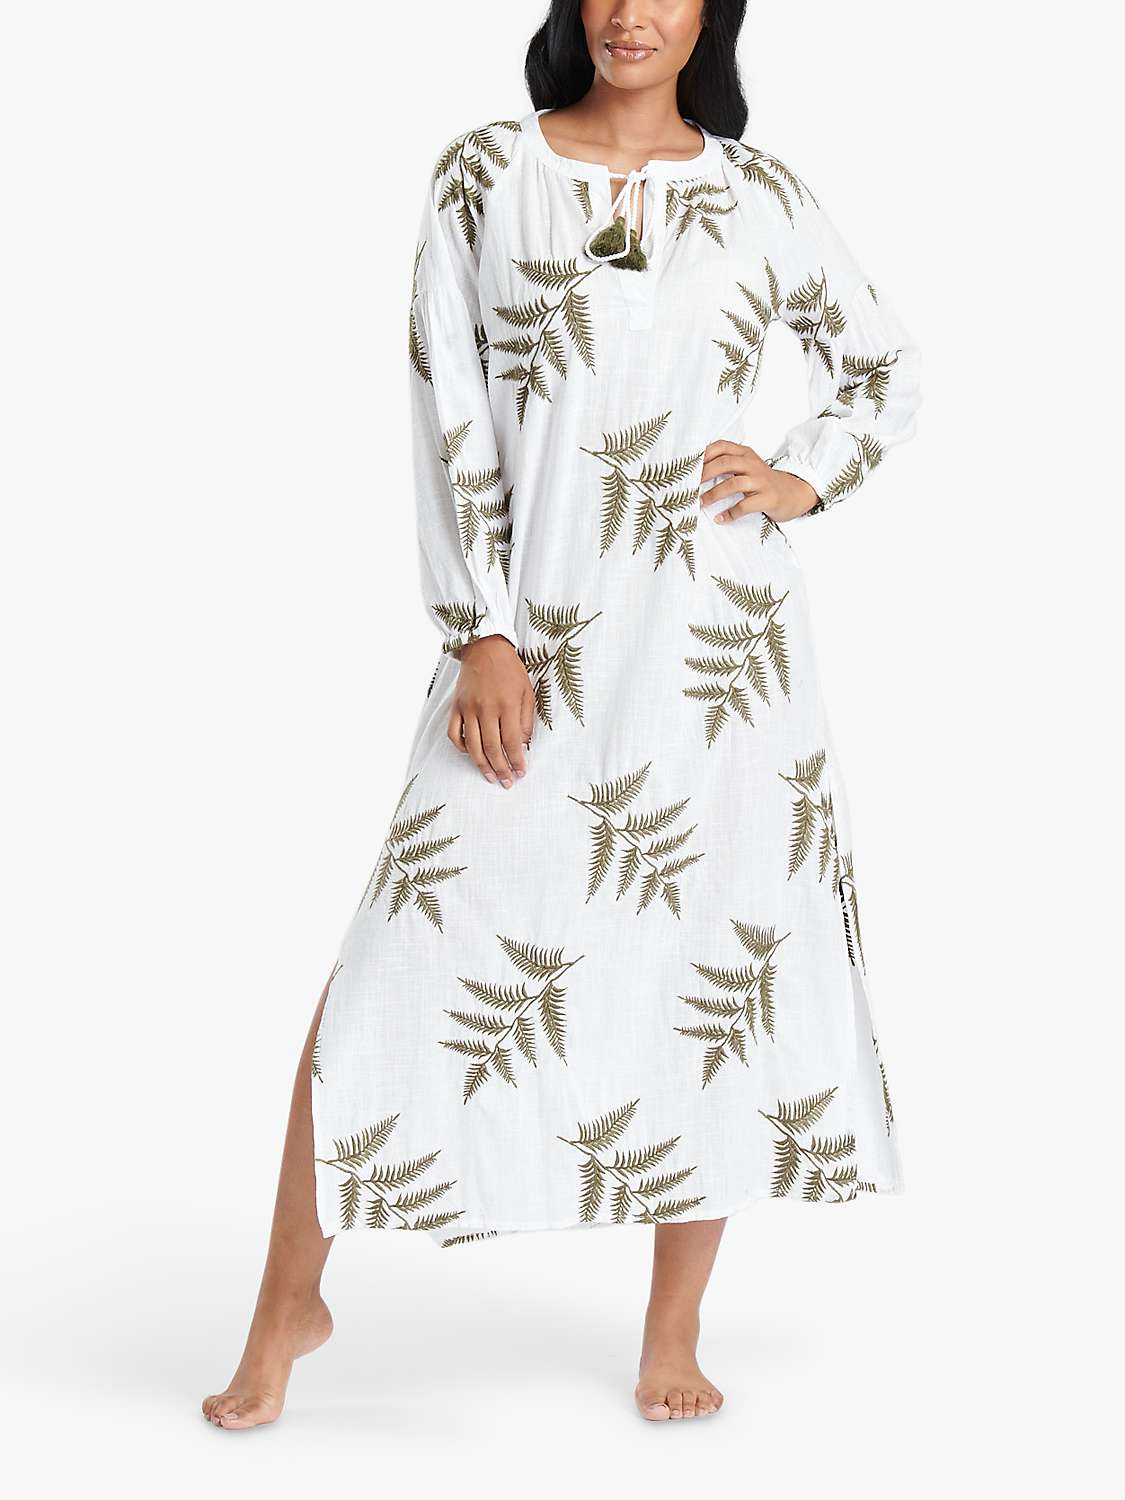 Buy South Beach Embroidered Tie Neck Maxi Beach Dress, White/Olive Online at johnlewis.com